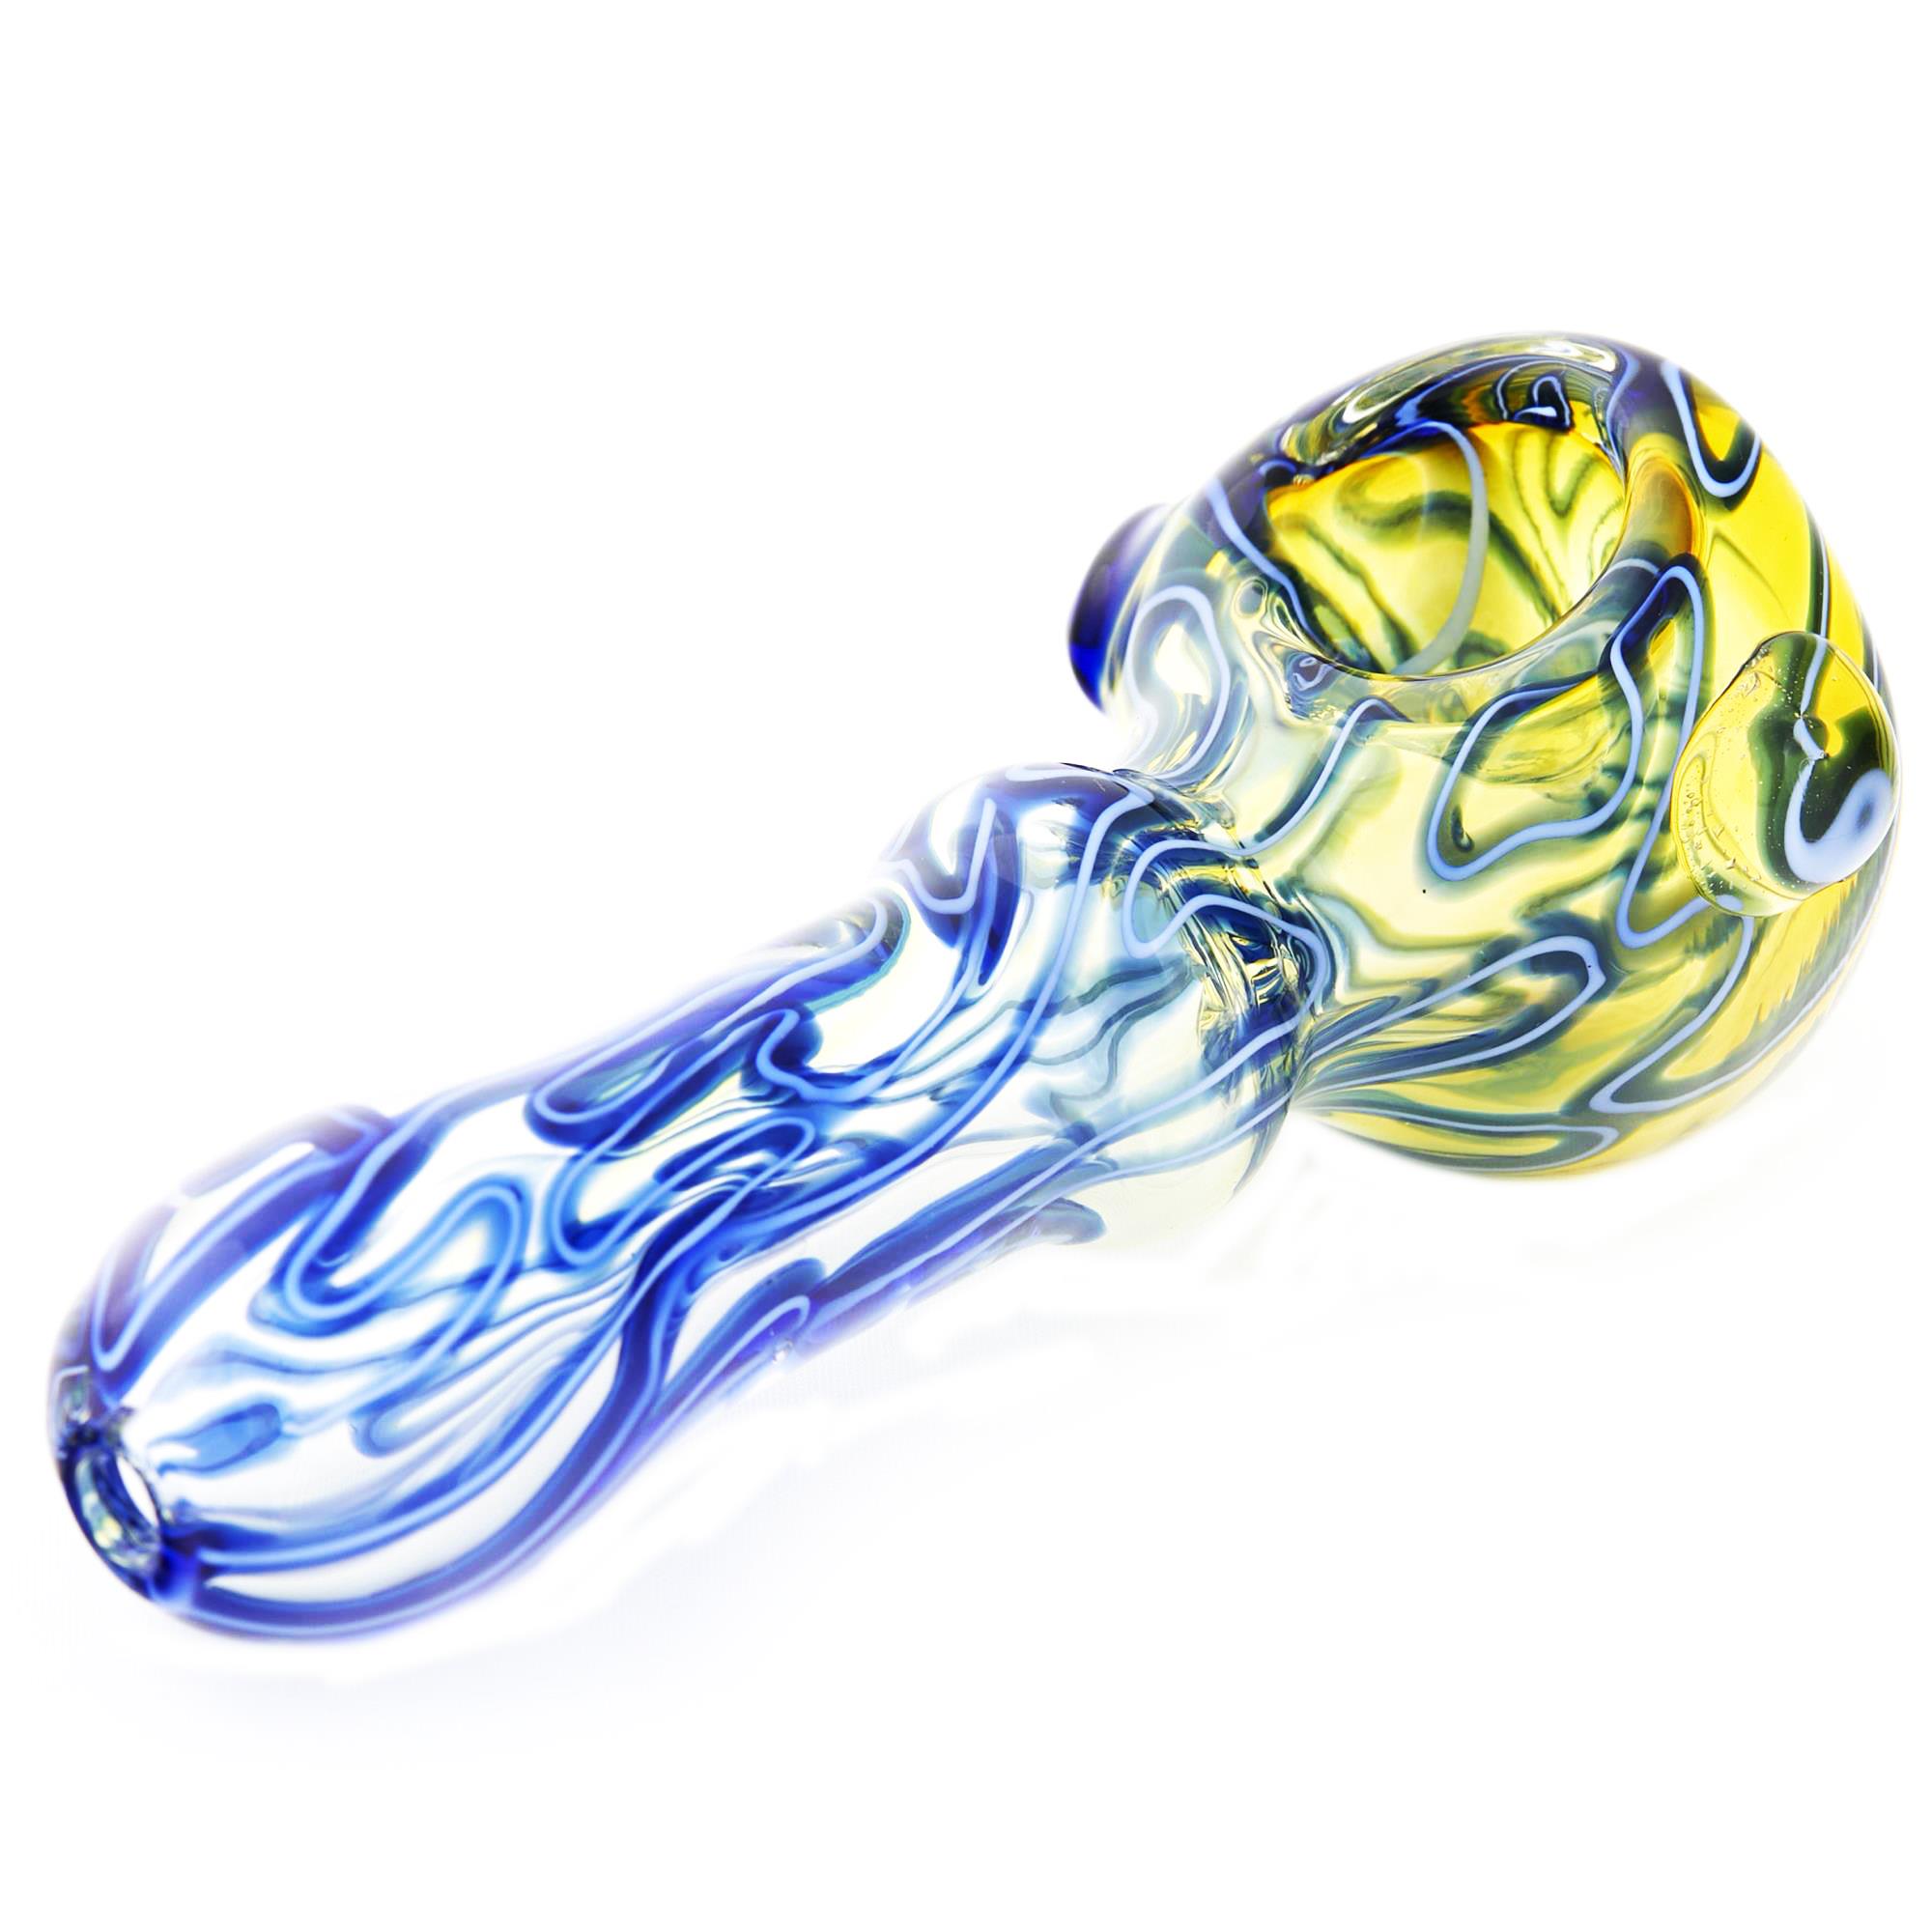 WEEDONT CARE SPOON PIPE